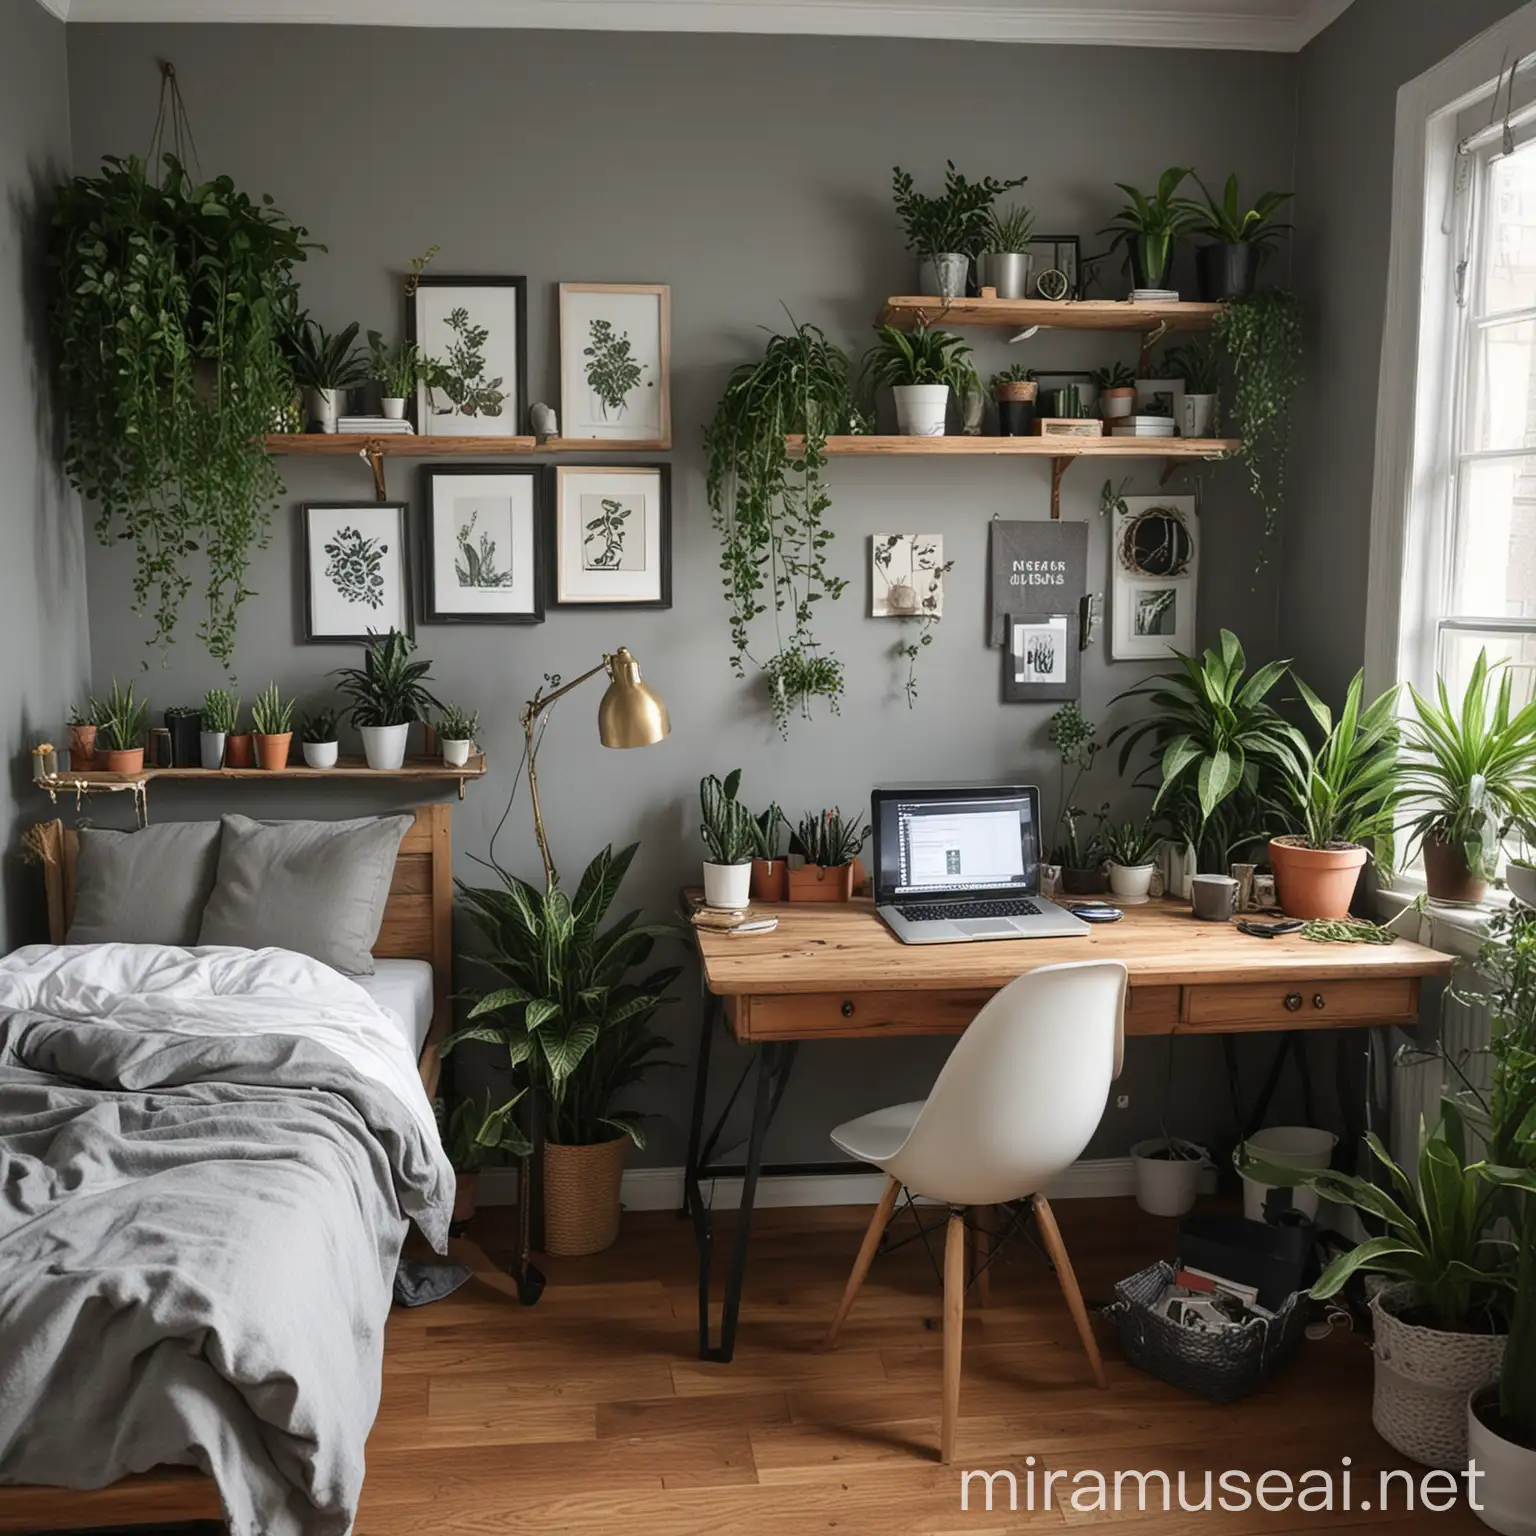 cozy home, gray walls, a lot of plants, bedroom, workdesk